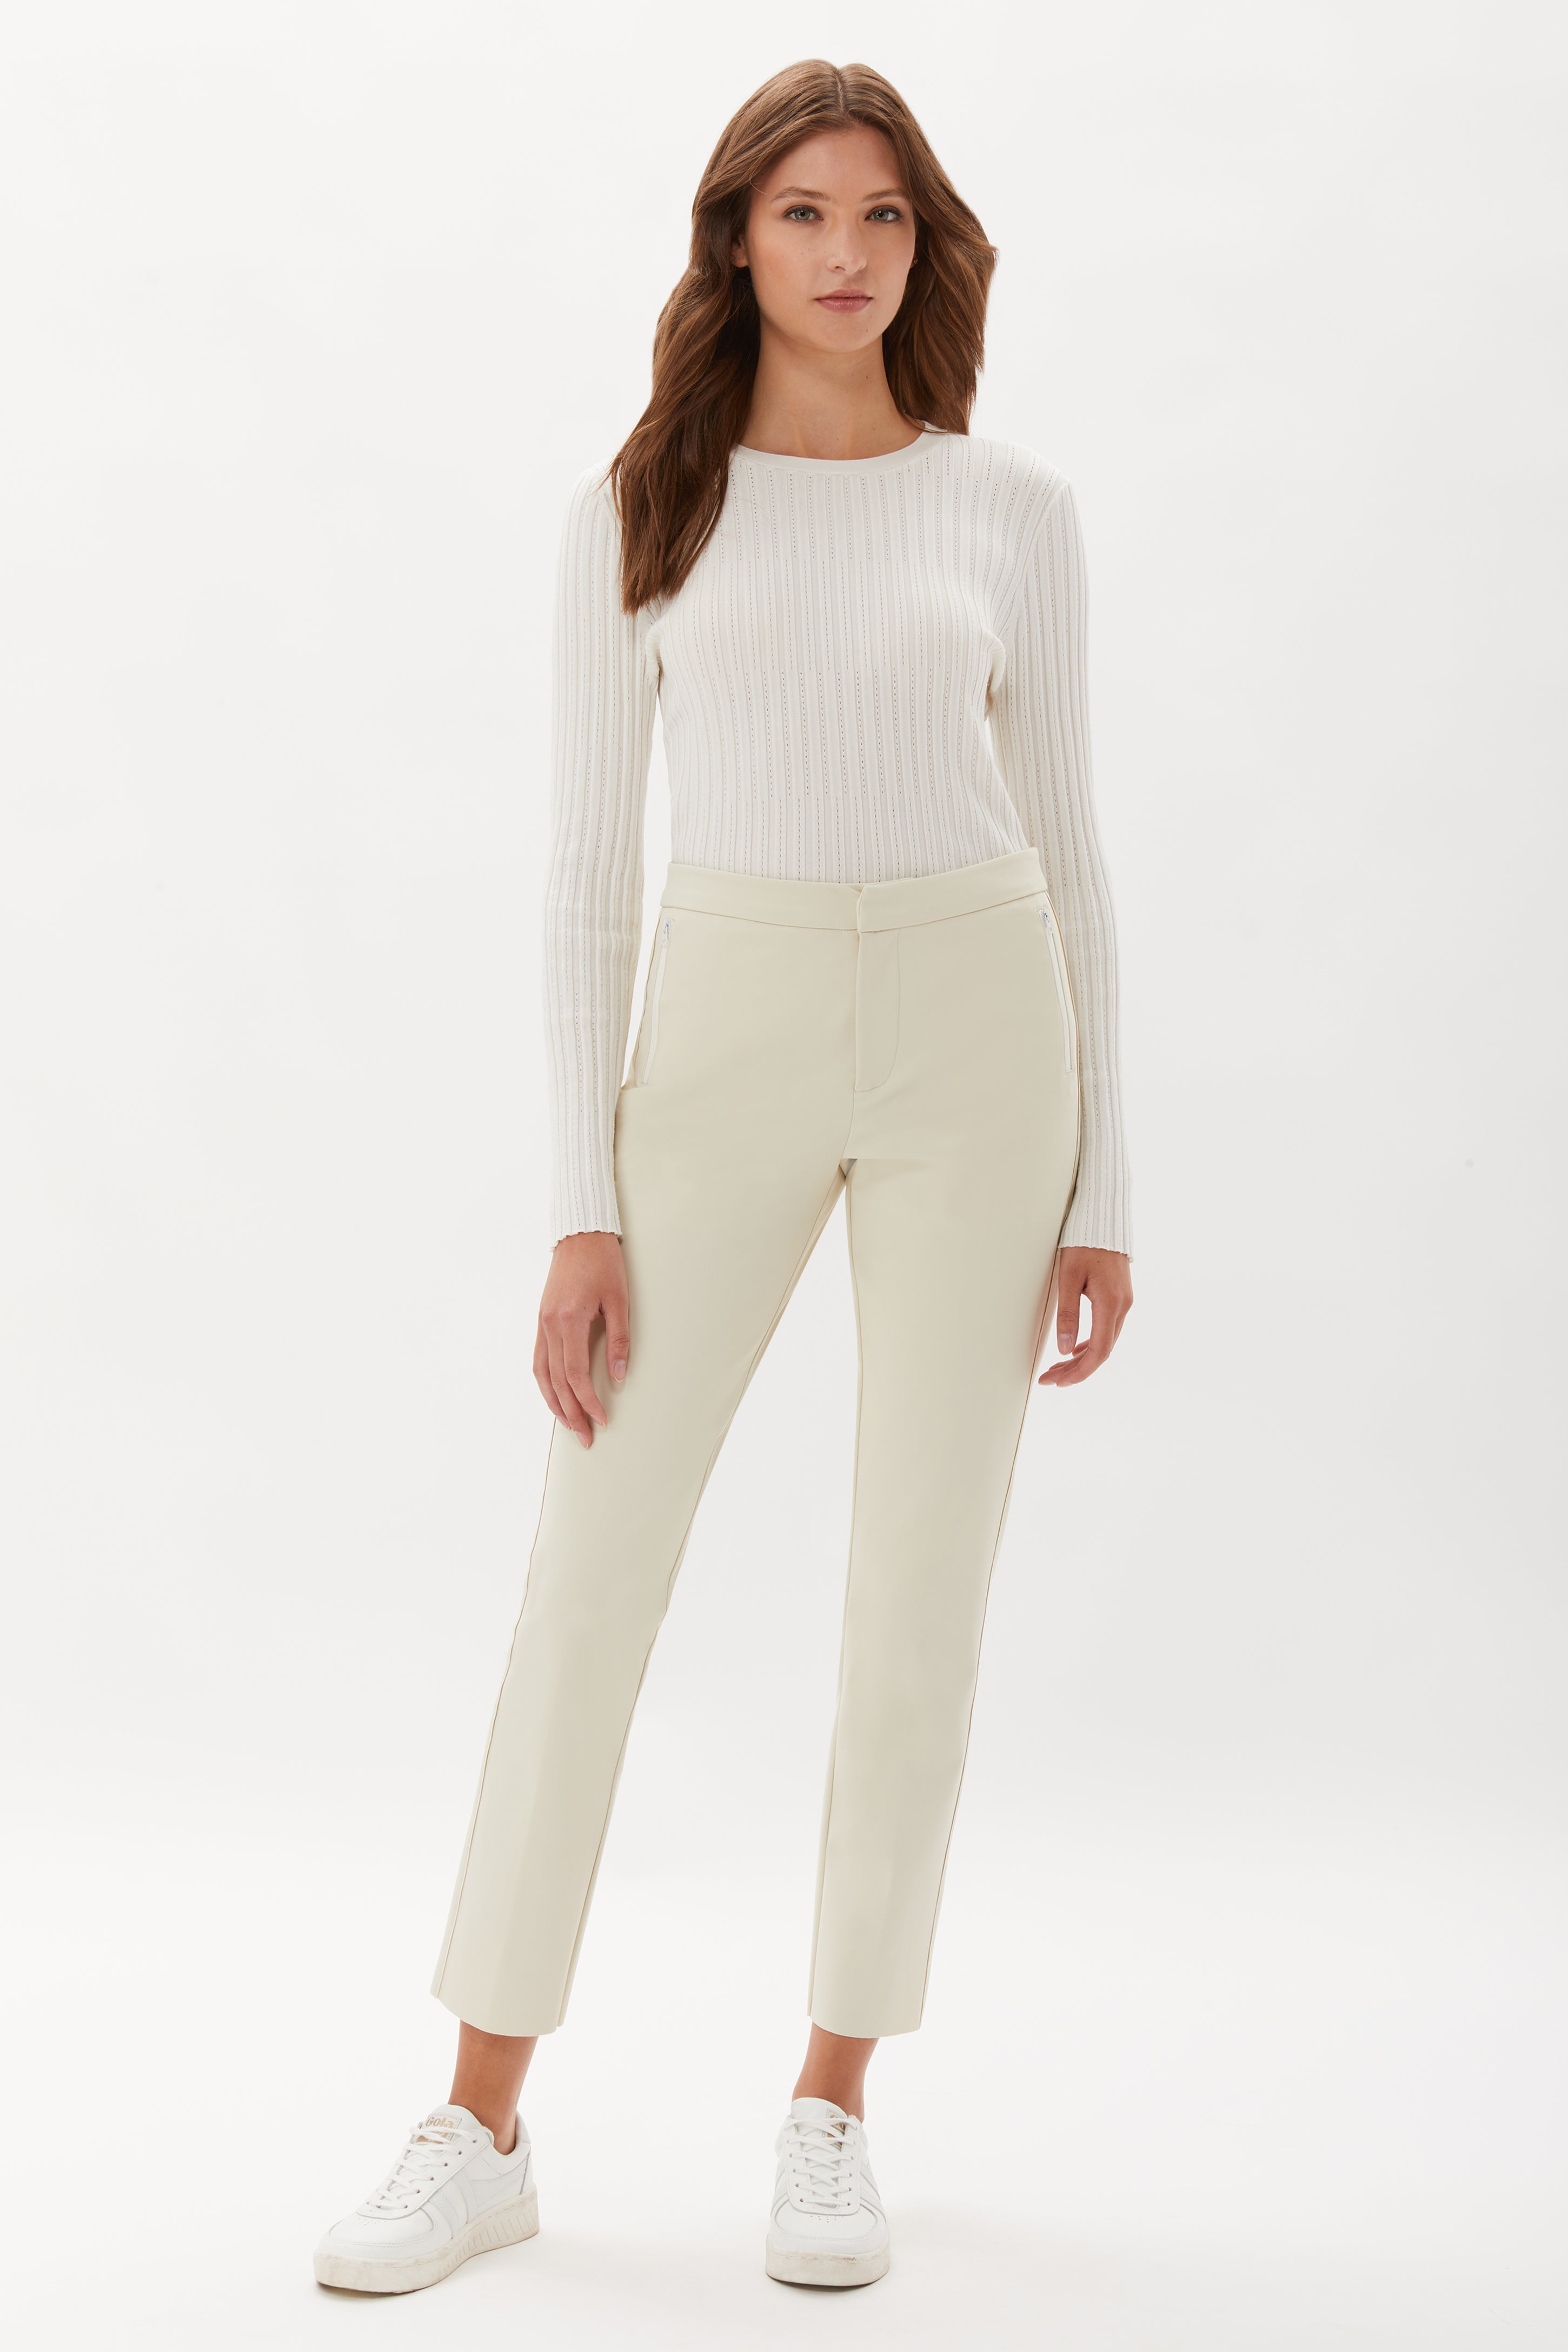 Shop for White & Cream | Cropped Trousers | Trousers & Shorts | Womens |  online at bonprix